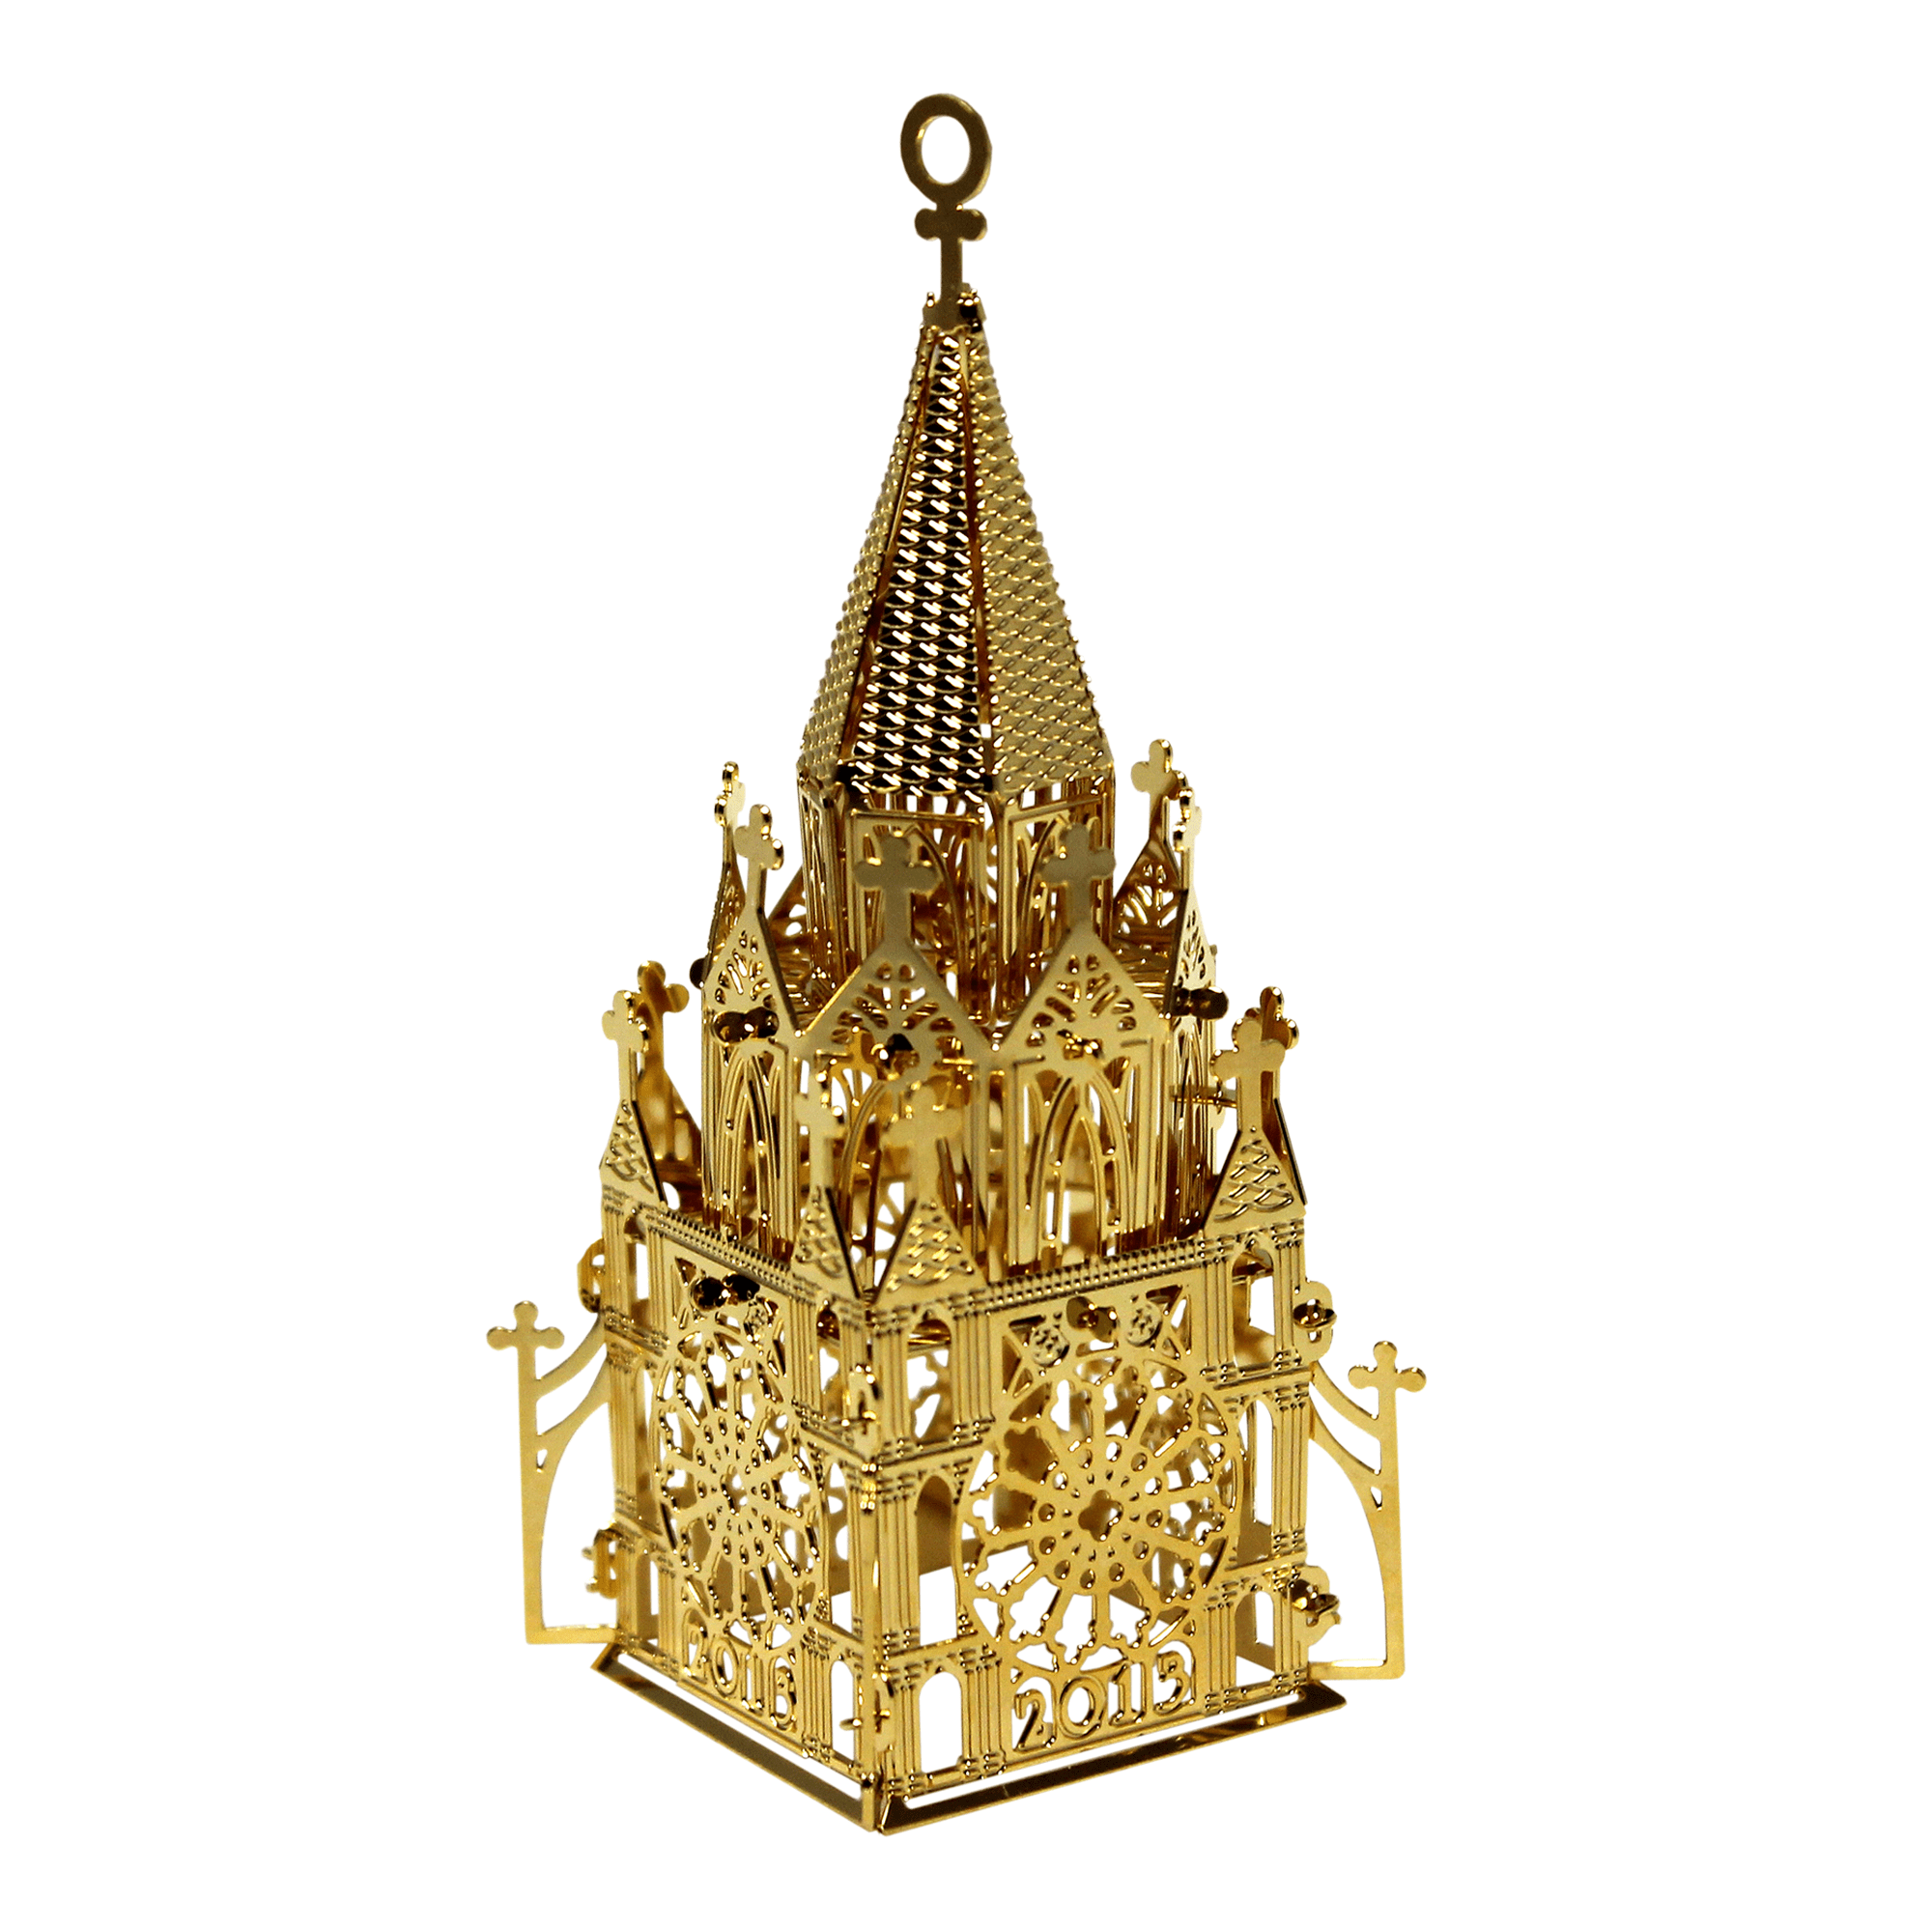 3D Brass Ornament Plated in 24K Gold